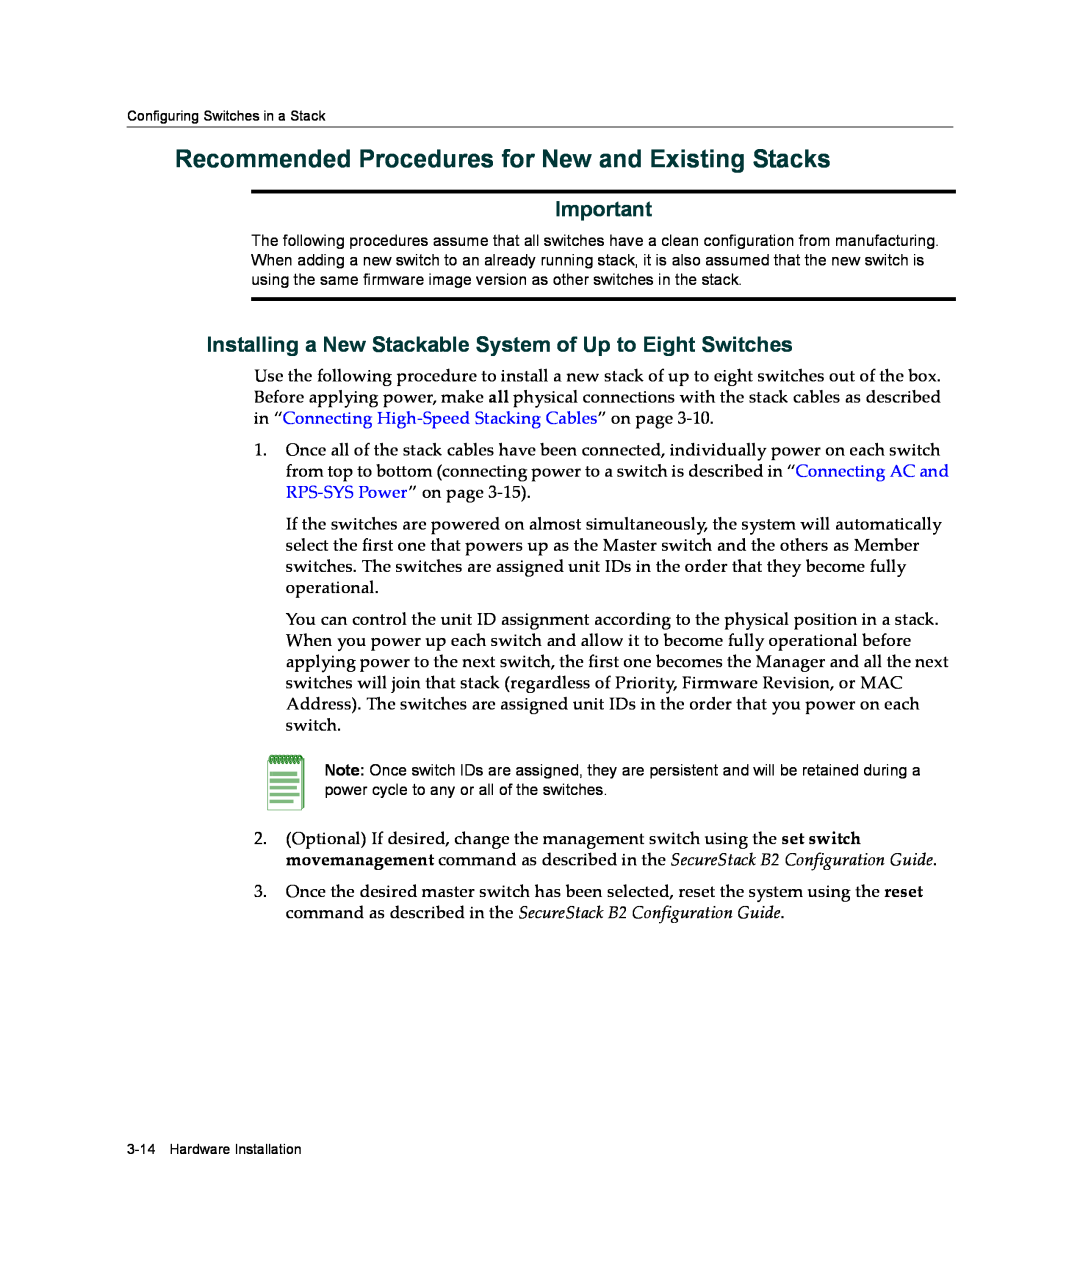 Enterasys Networks B2G124-24 manual Recommended Procedures for New and Existing Stacks 